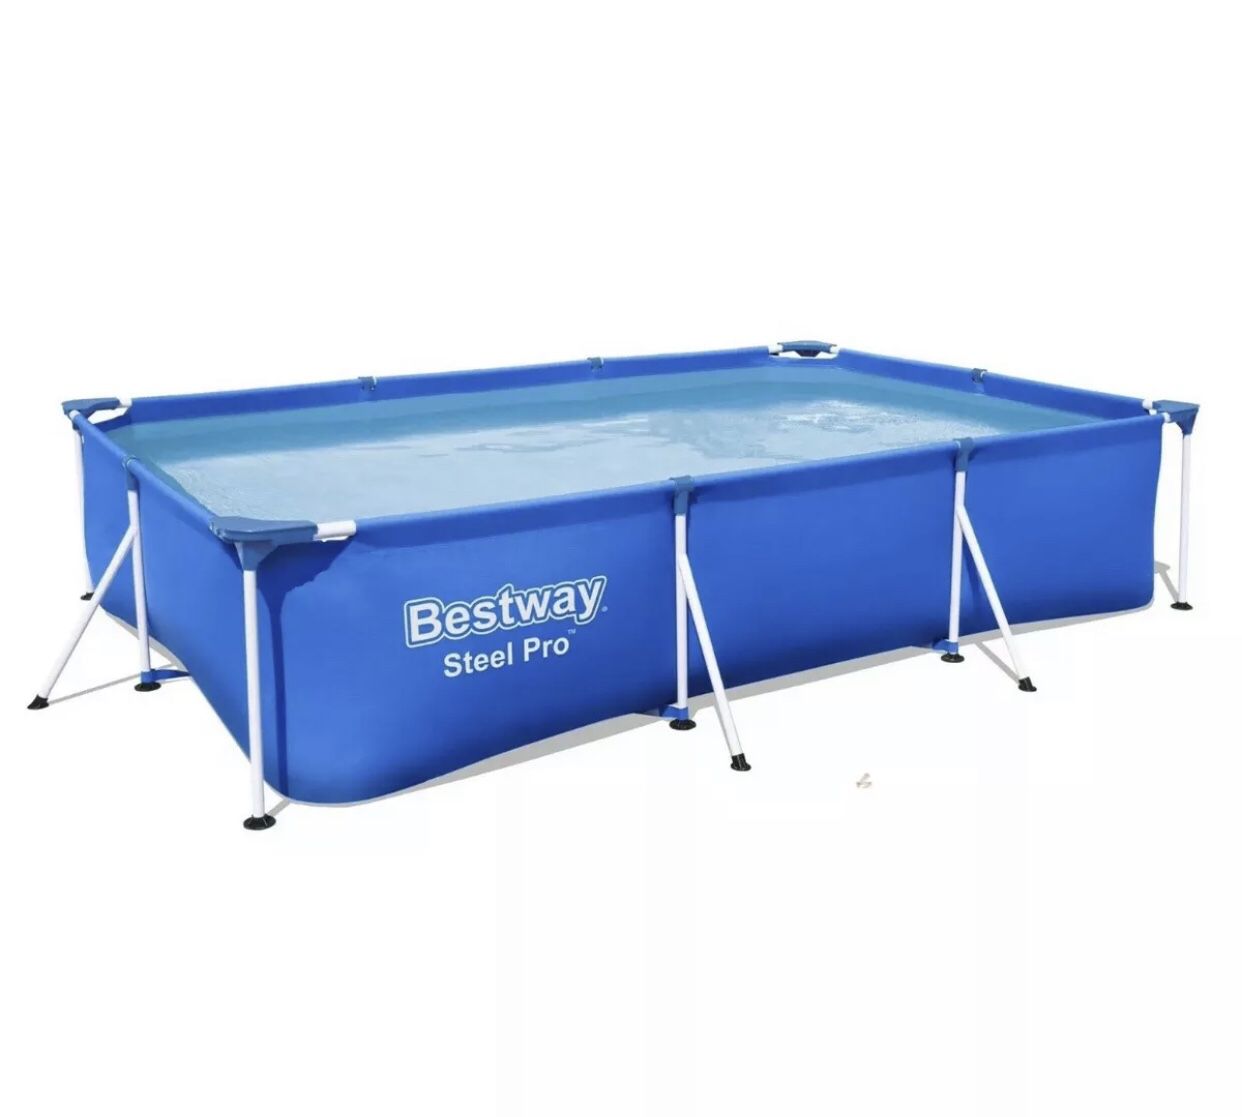  Bestway Steel Pro 9'10  X 6'7  X 26  Rectangle Above Ground Pool Swimming Pool